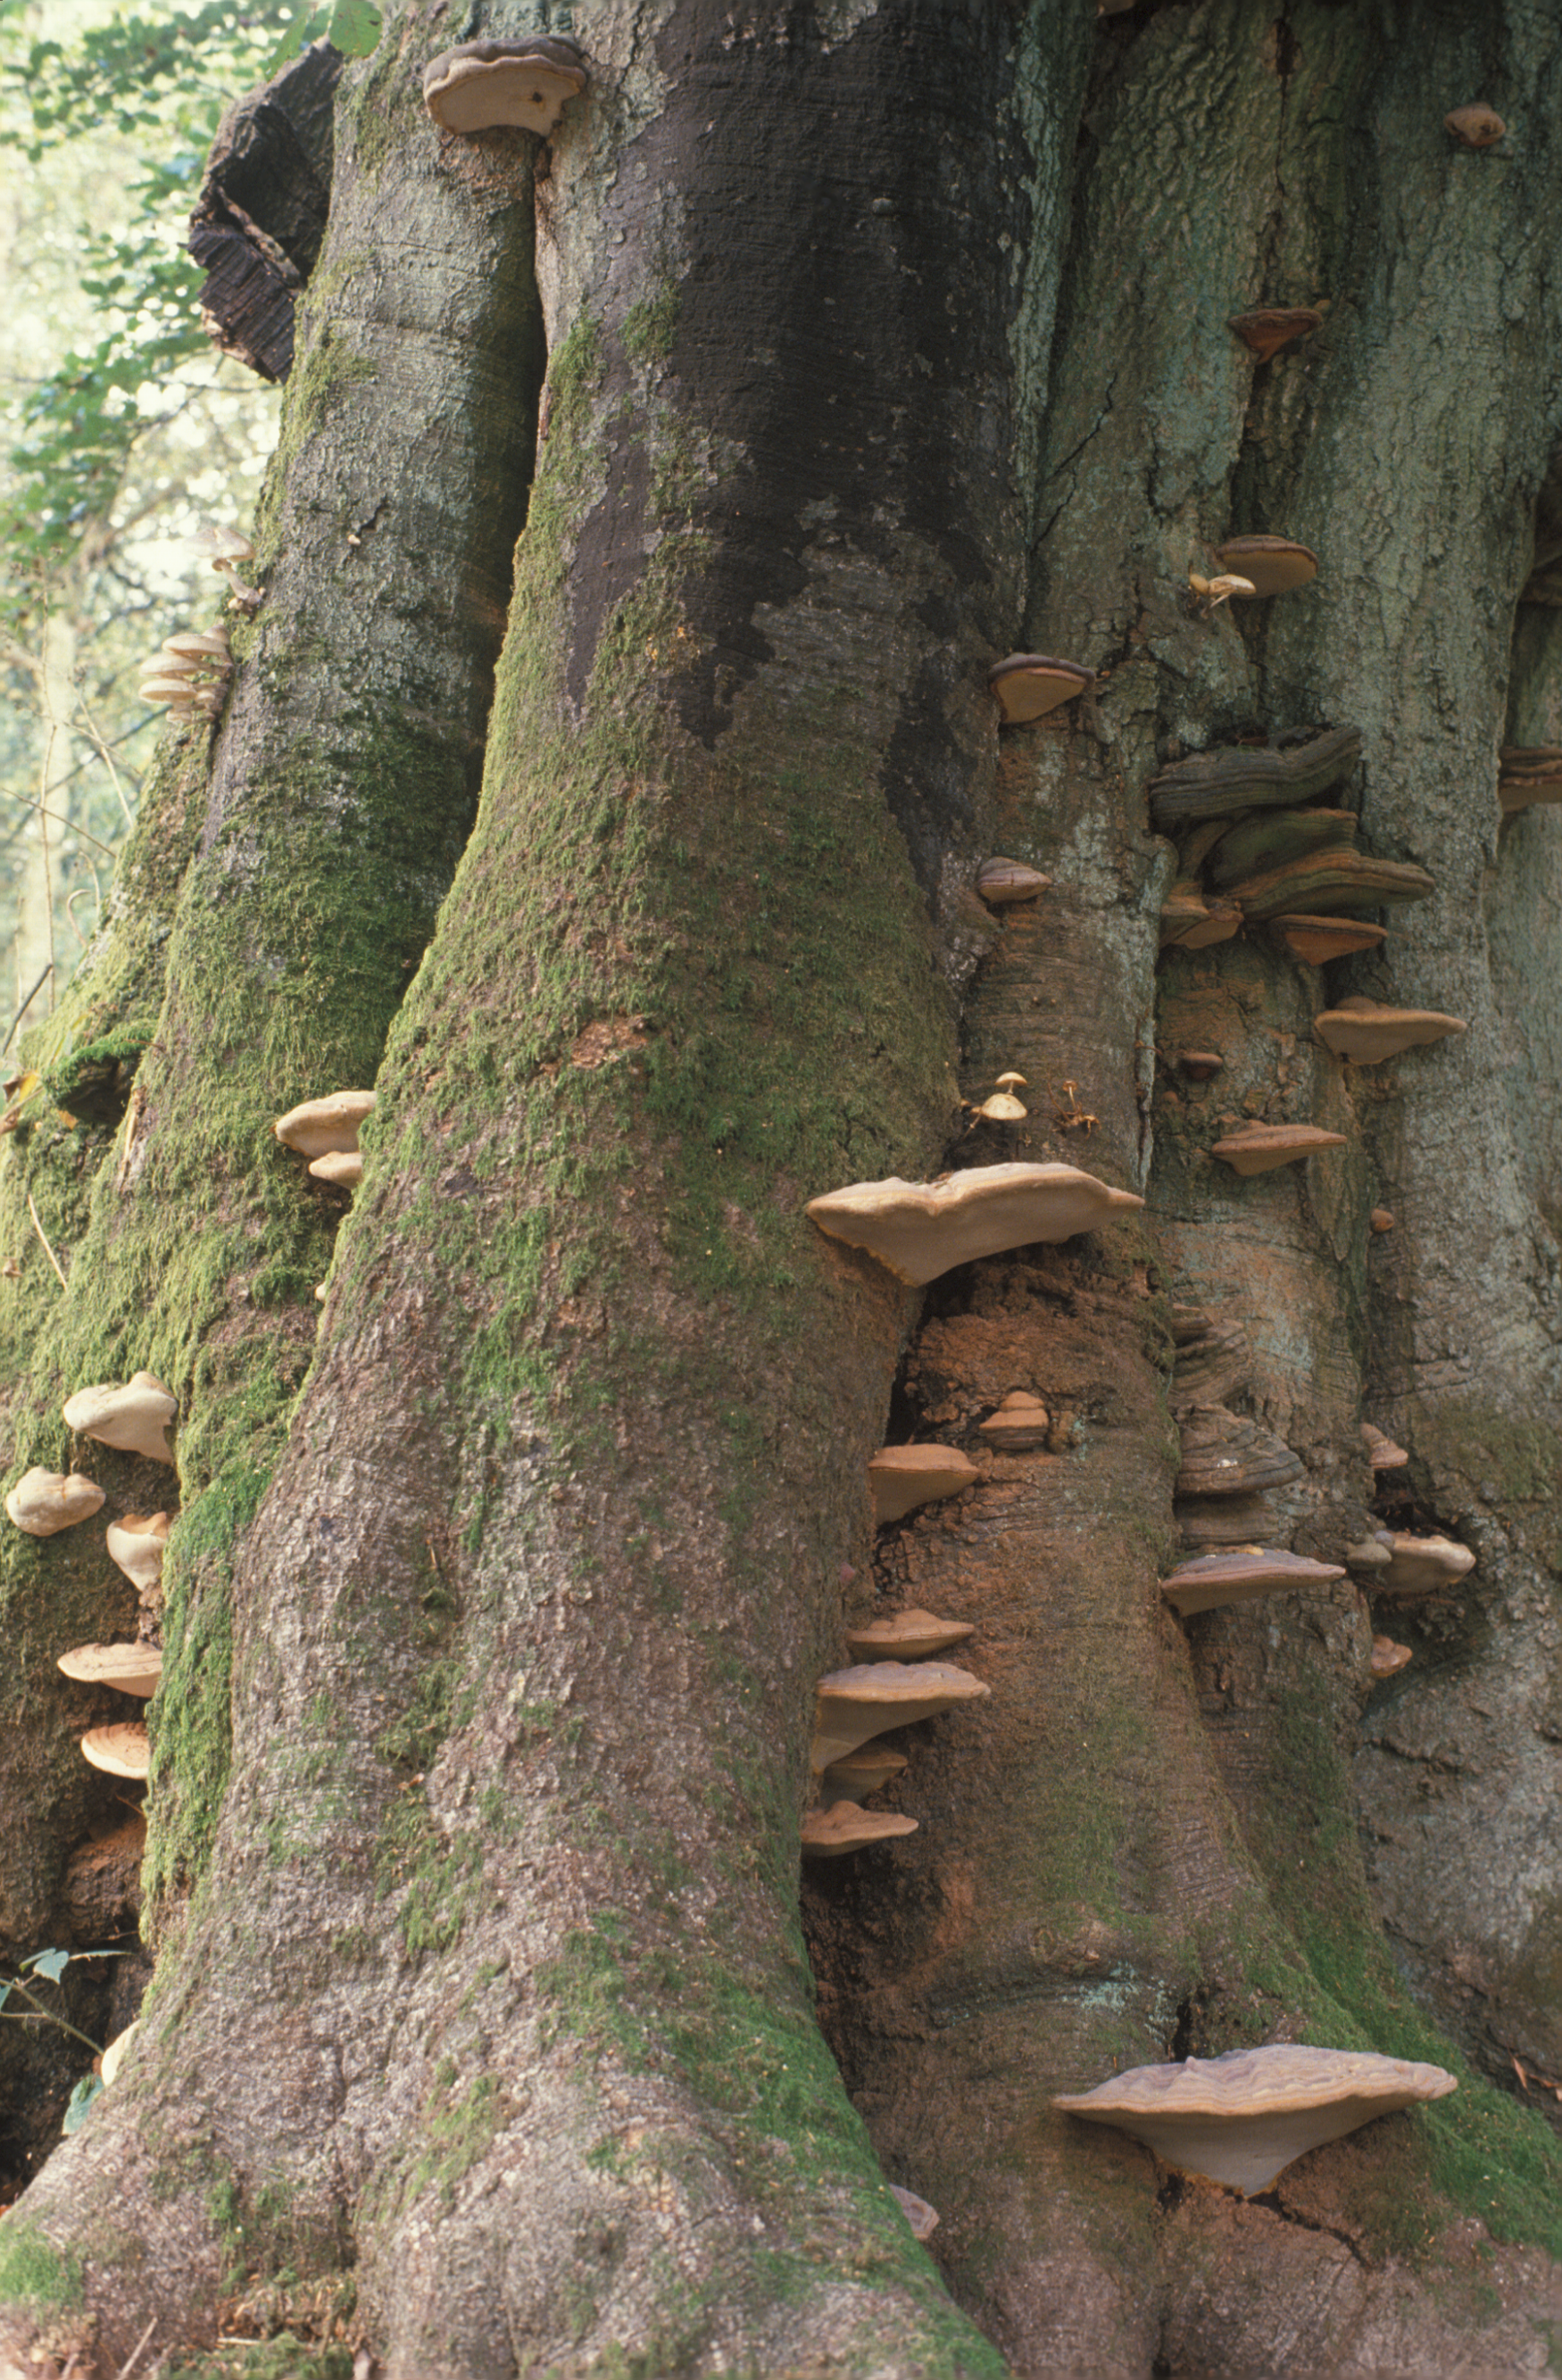 Take photos of large fruiting bodies of heartwood decomposer fungi. Photo: Ted Green